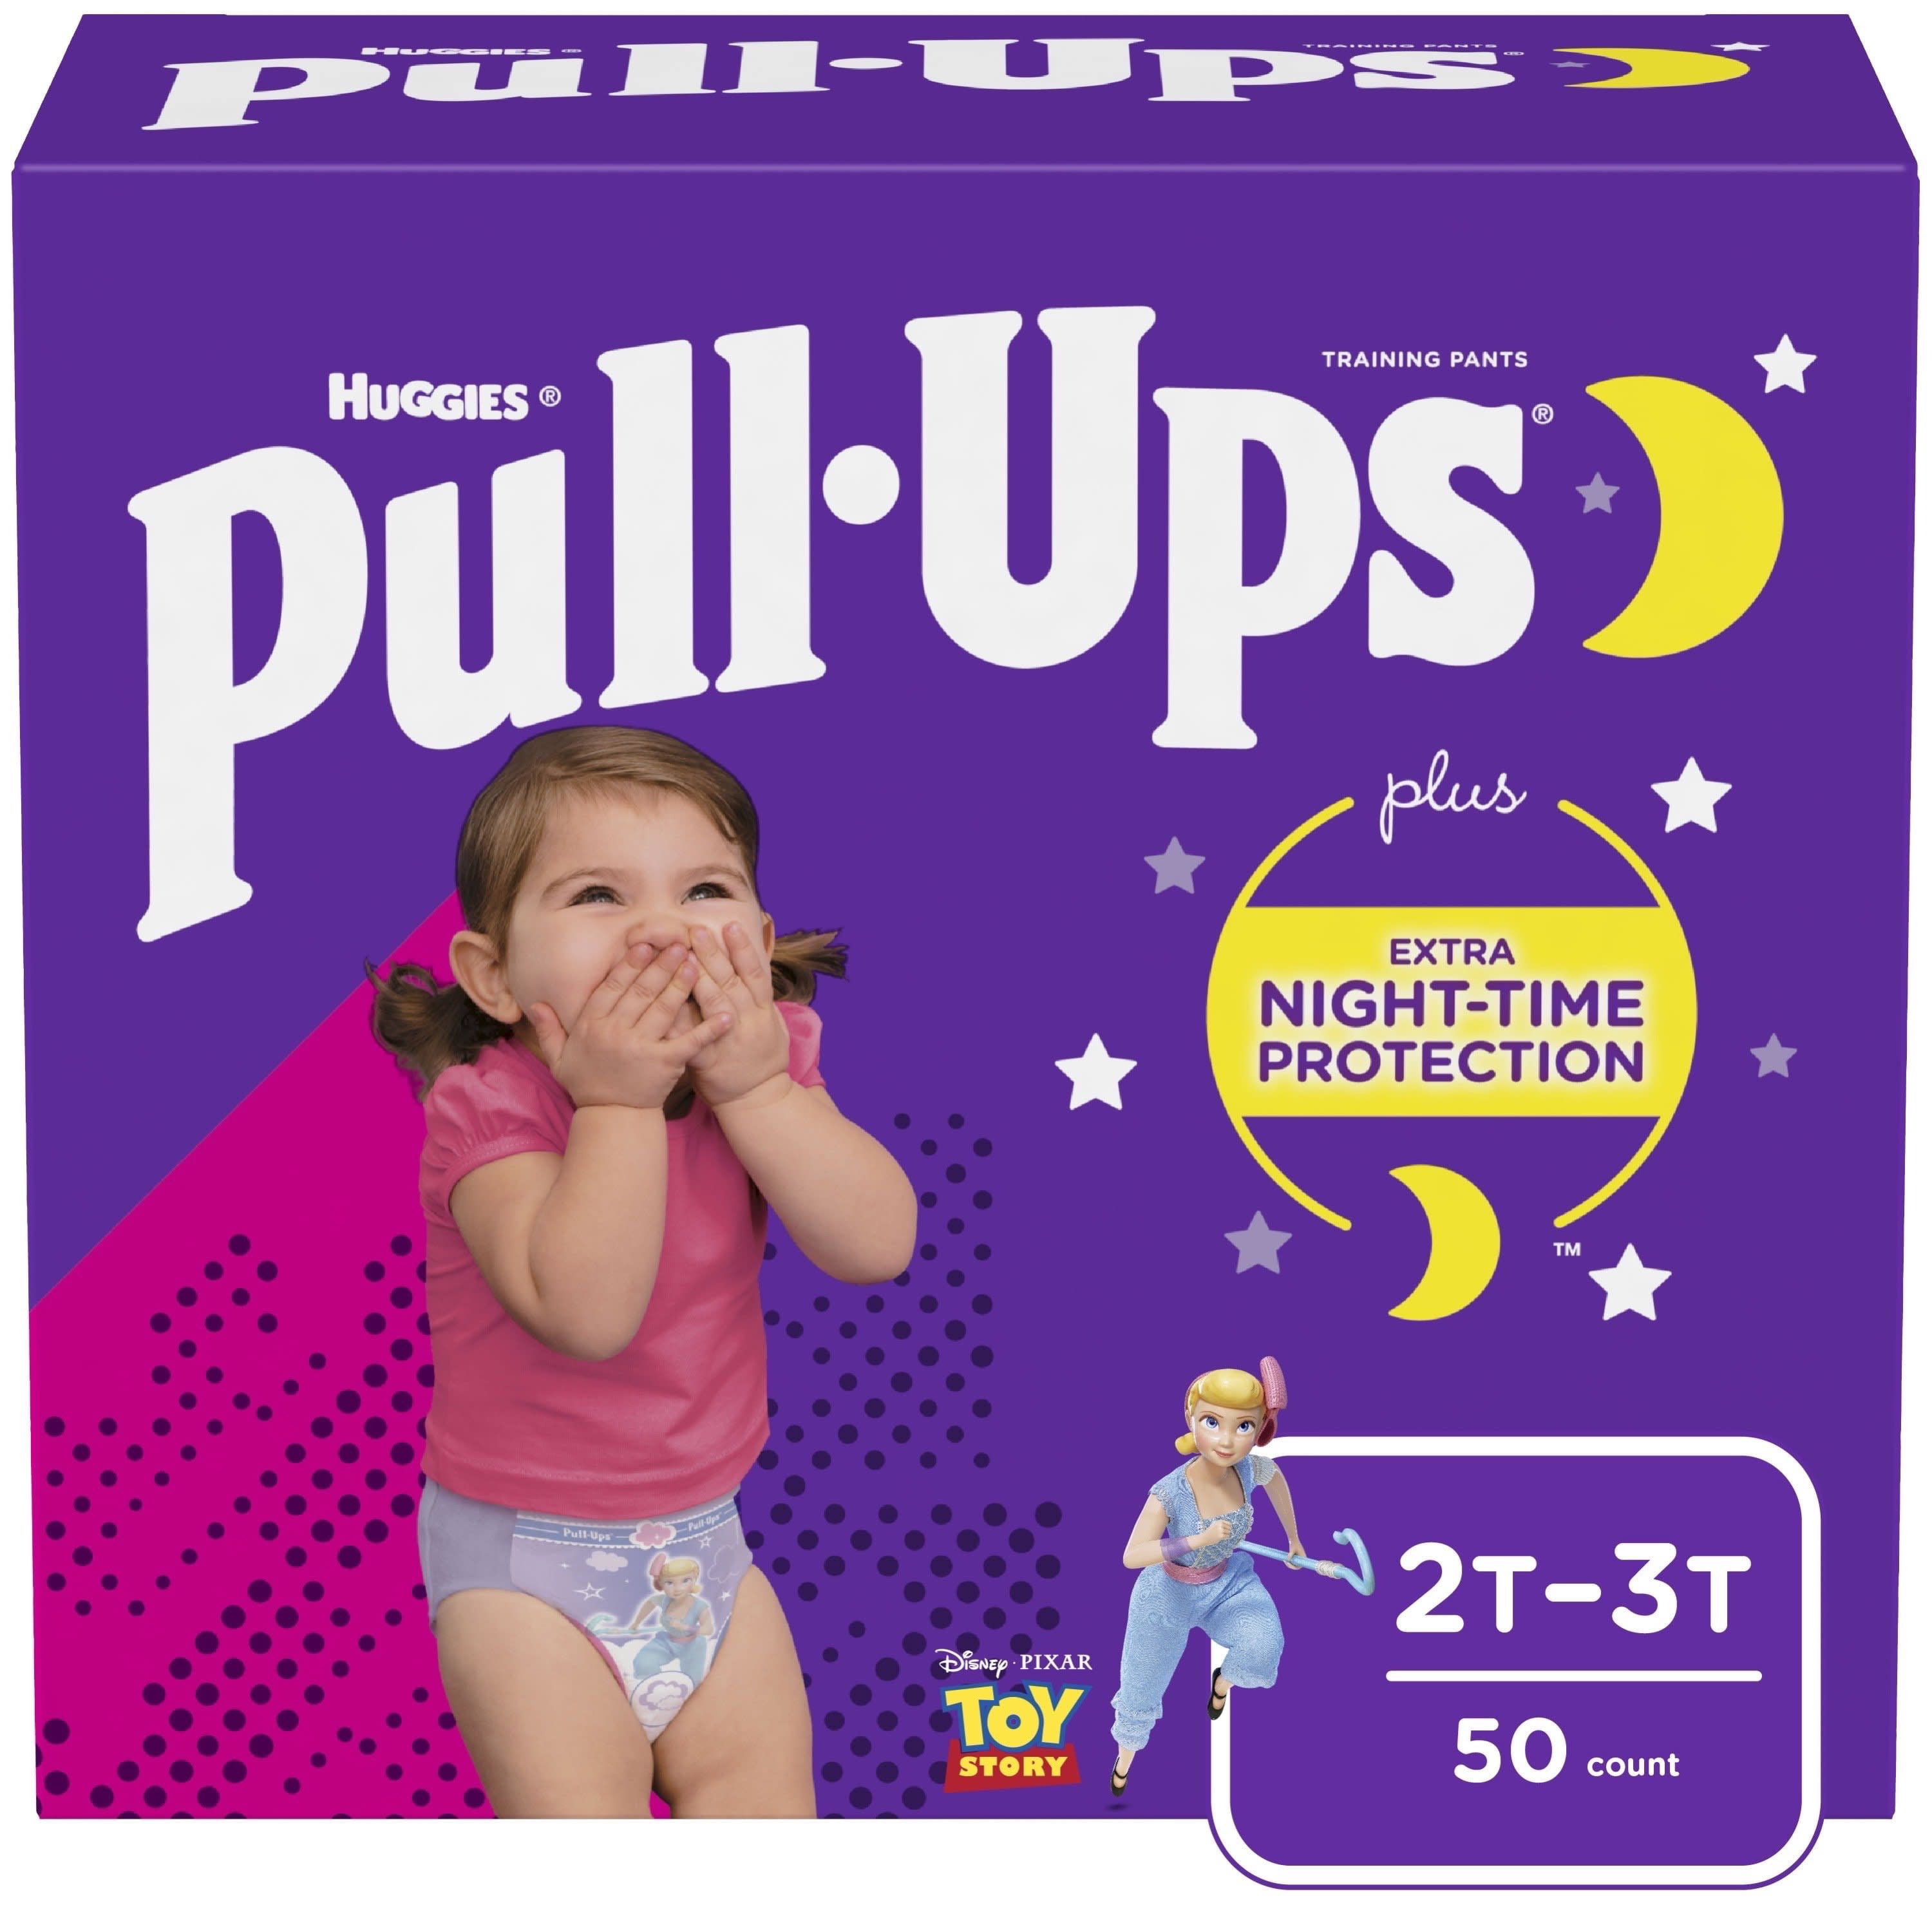 Huggies Girl/'s Pull-Ups Night-time Toilet Training Nappies Size Age 2-4 years